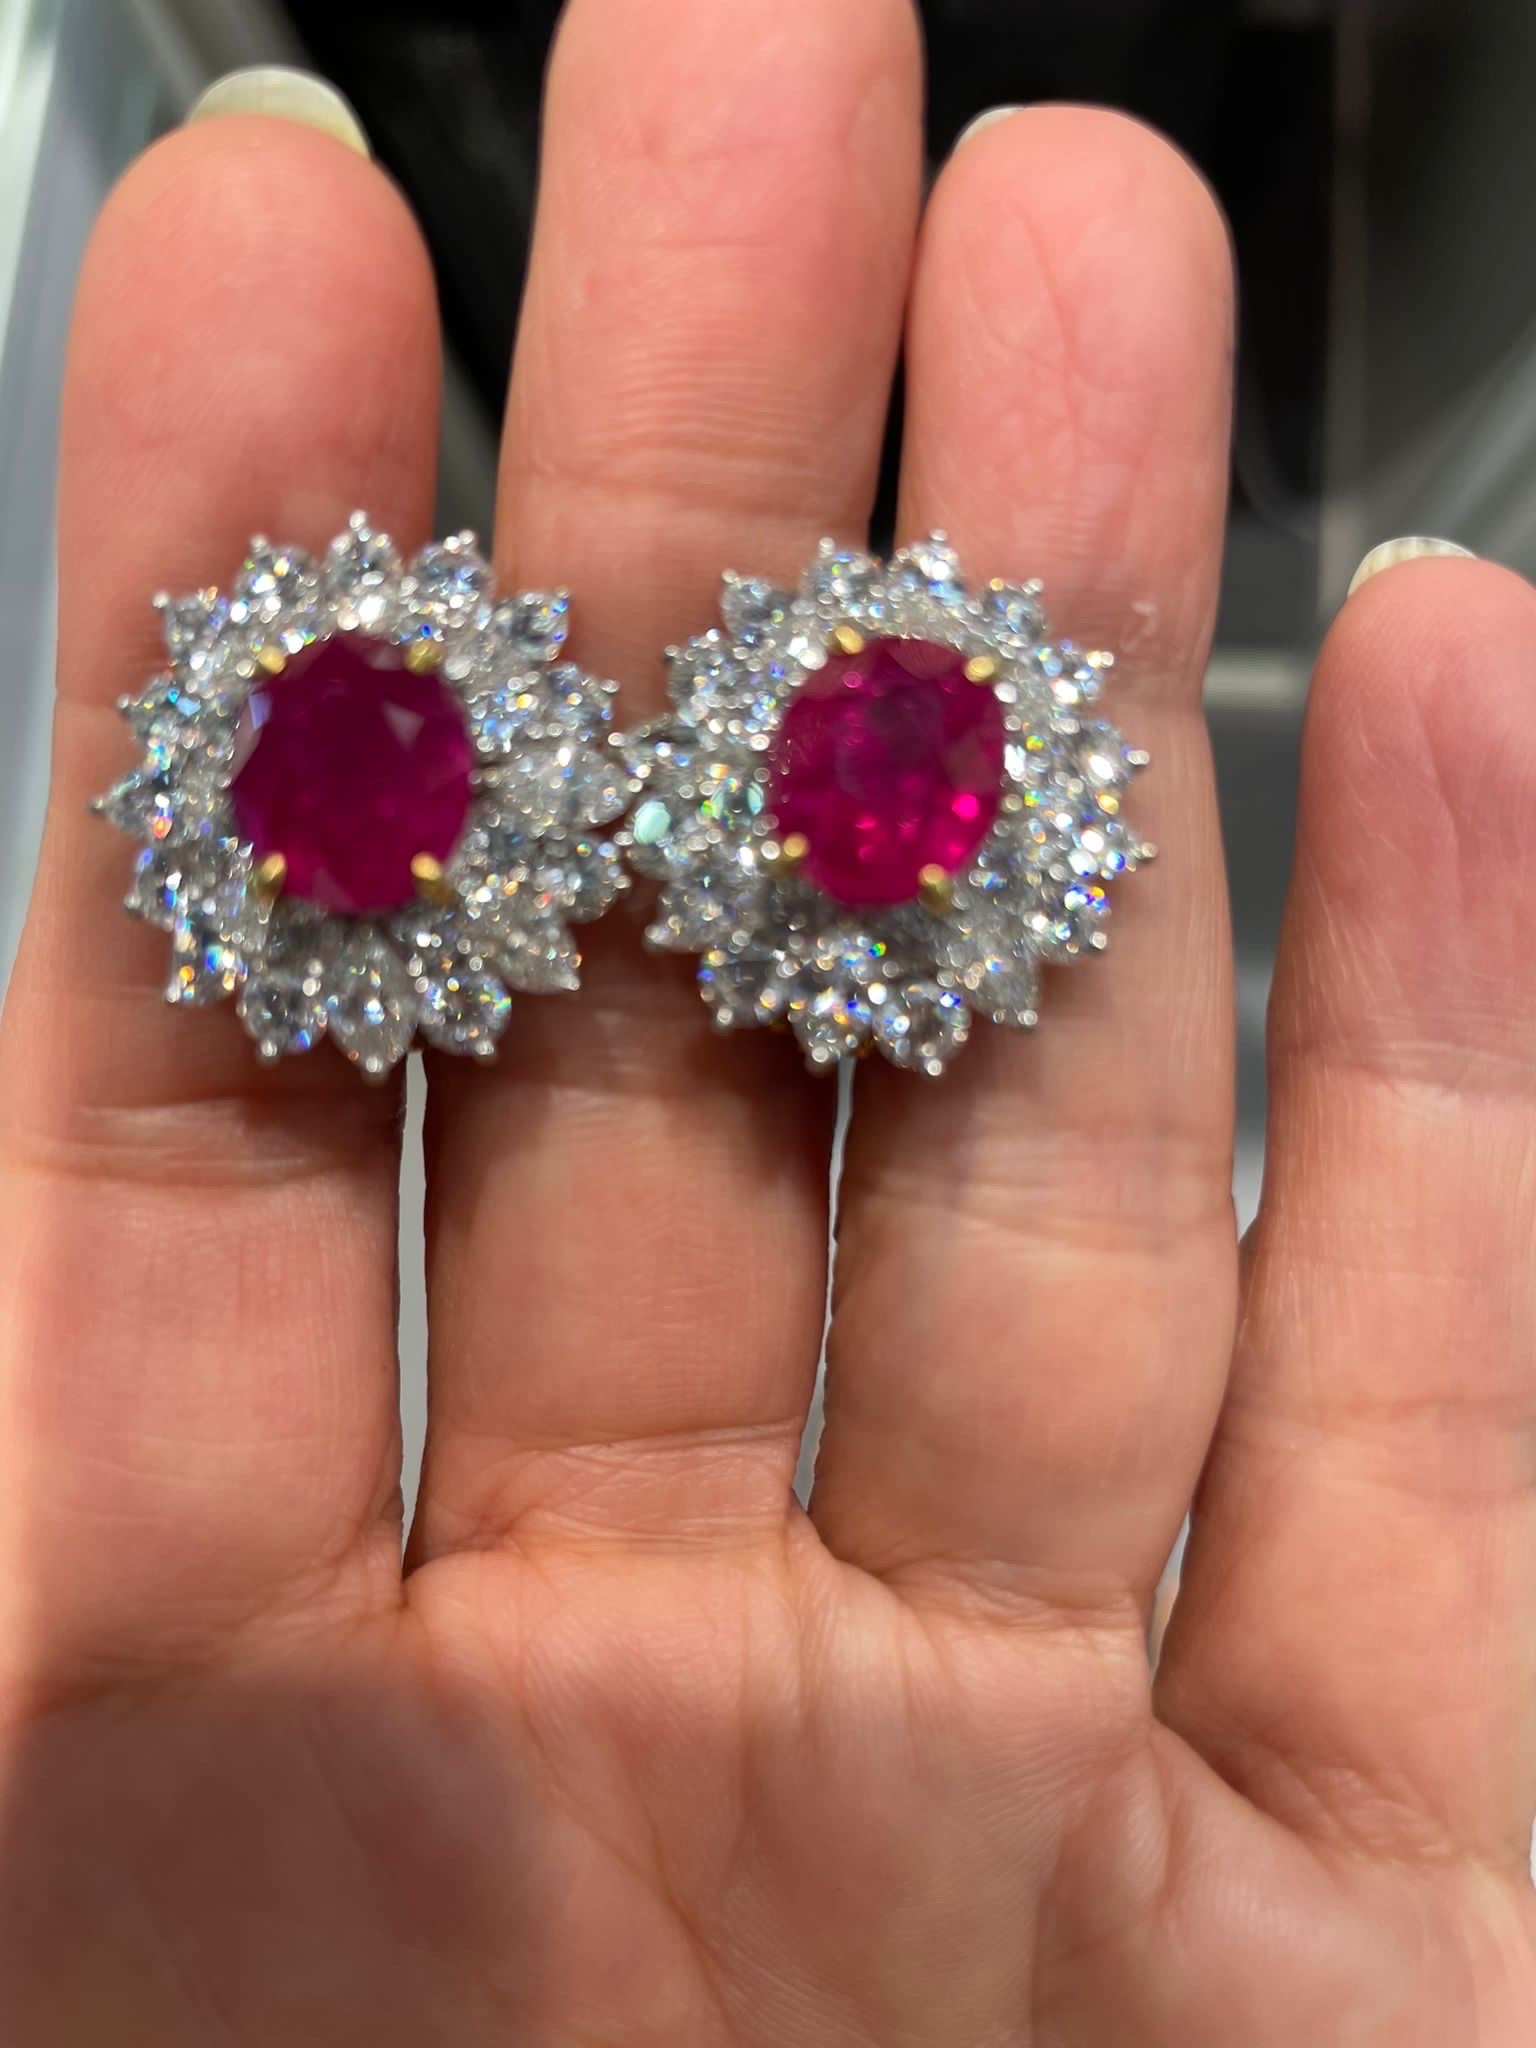 A beautiful pair of total 10.05 carat Burmese Ruby earrings, surrounded with 5.60 carat VS quality F/G color Diamonds set in solid 18K White Gold. 